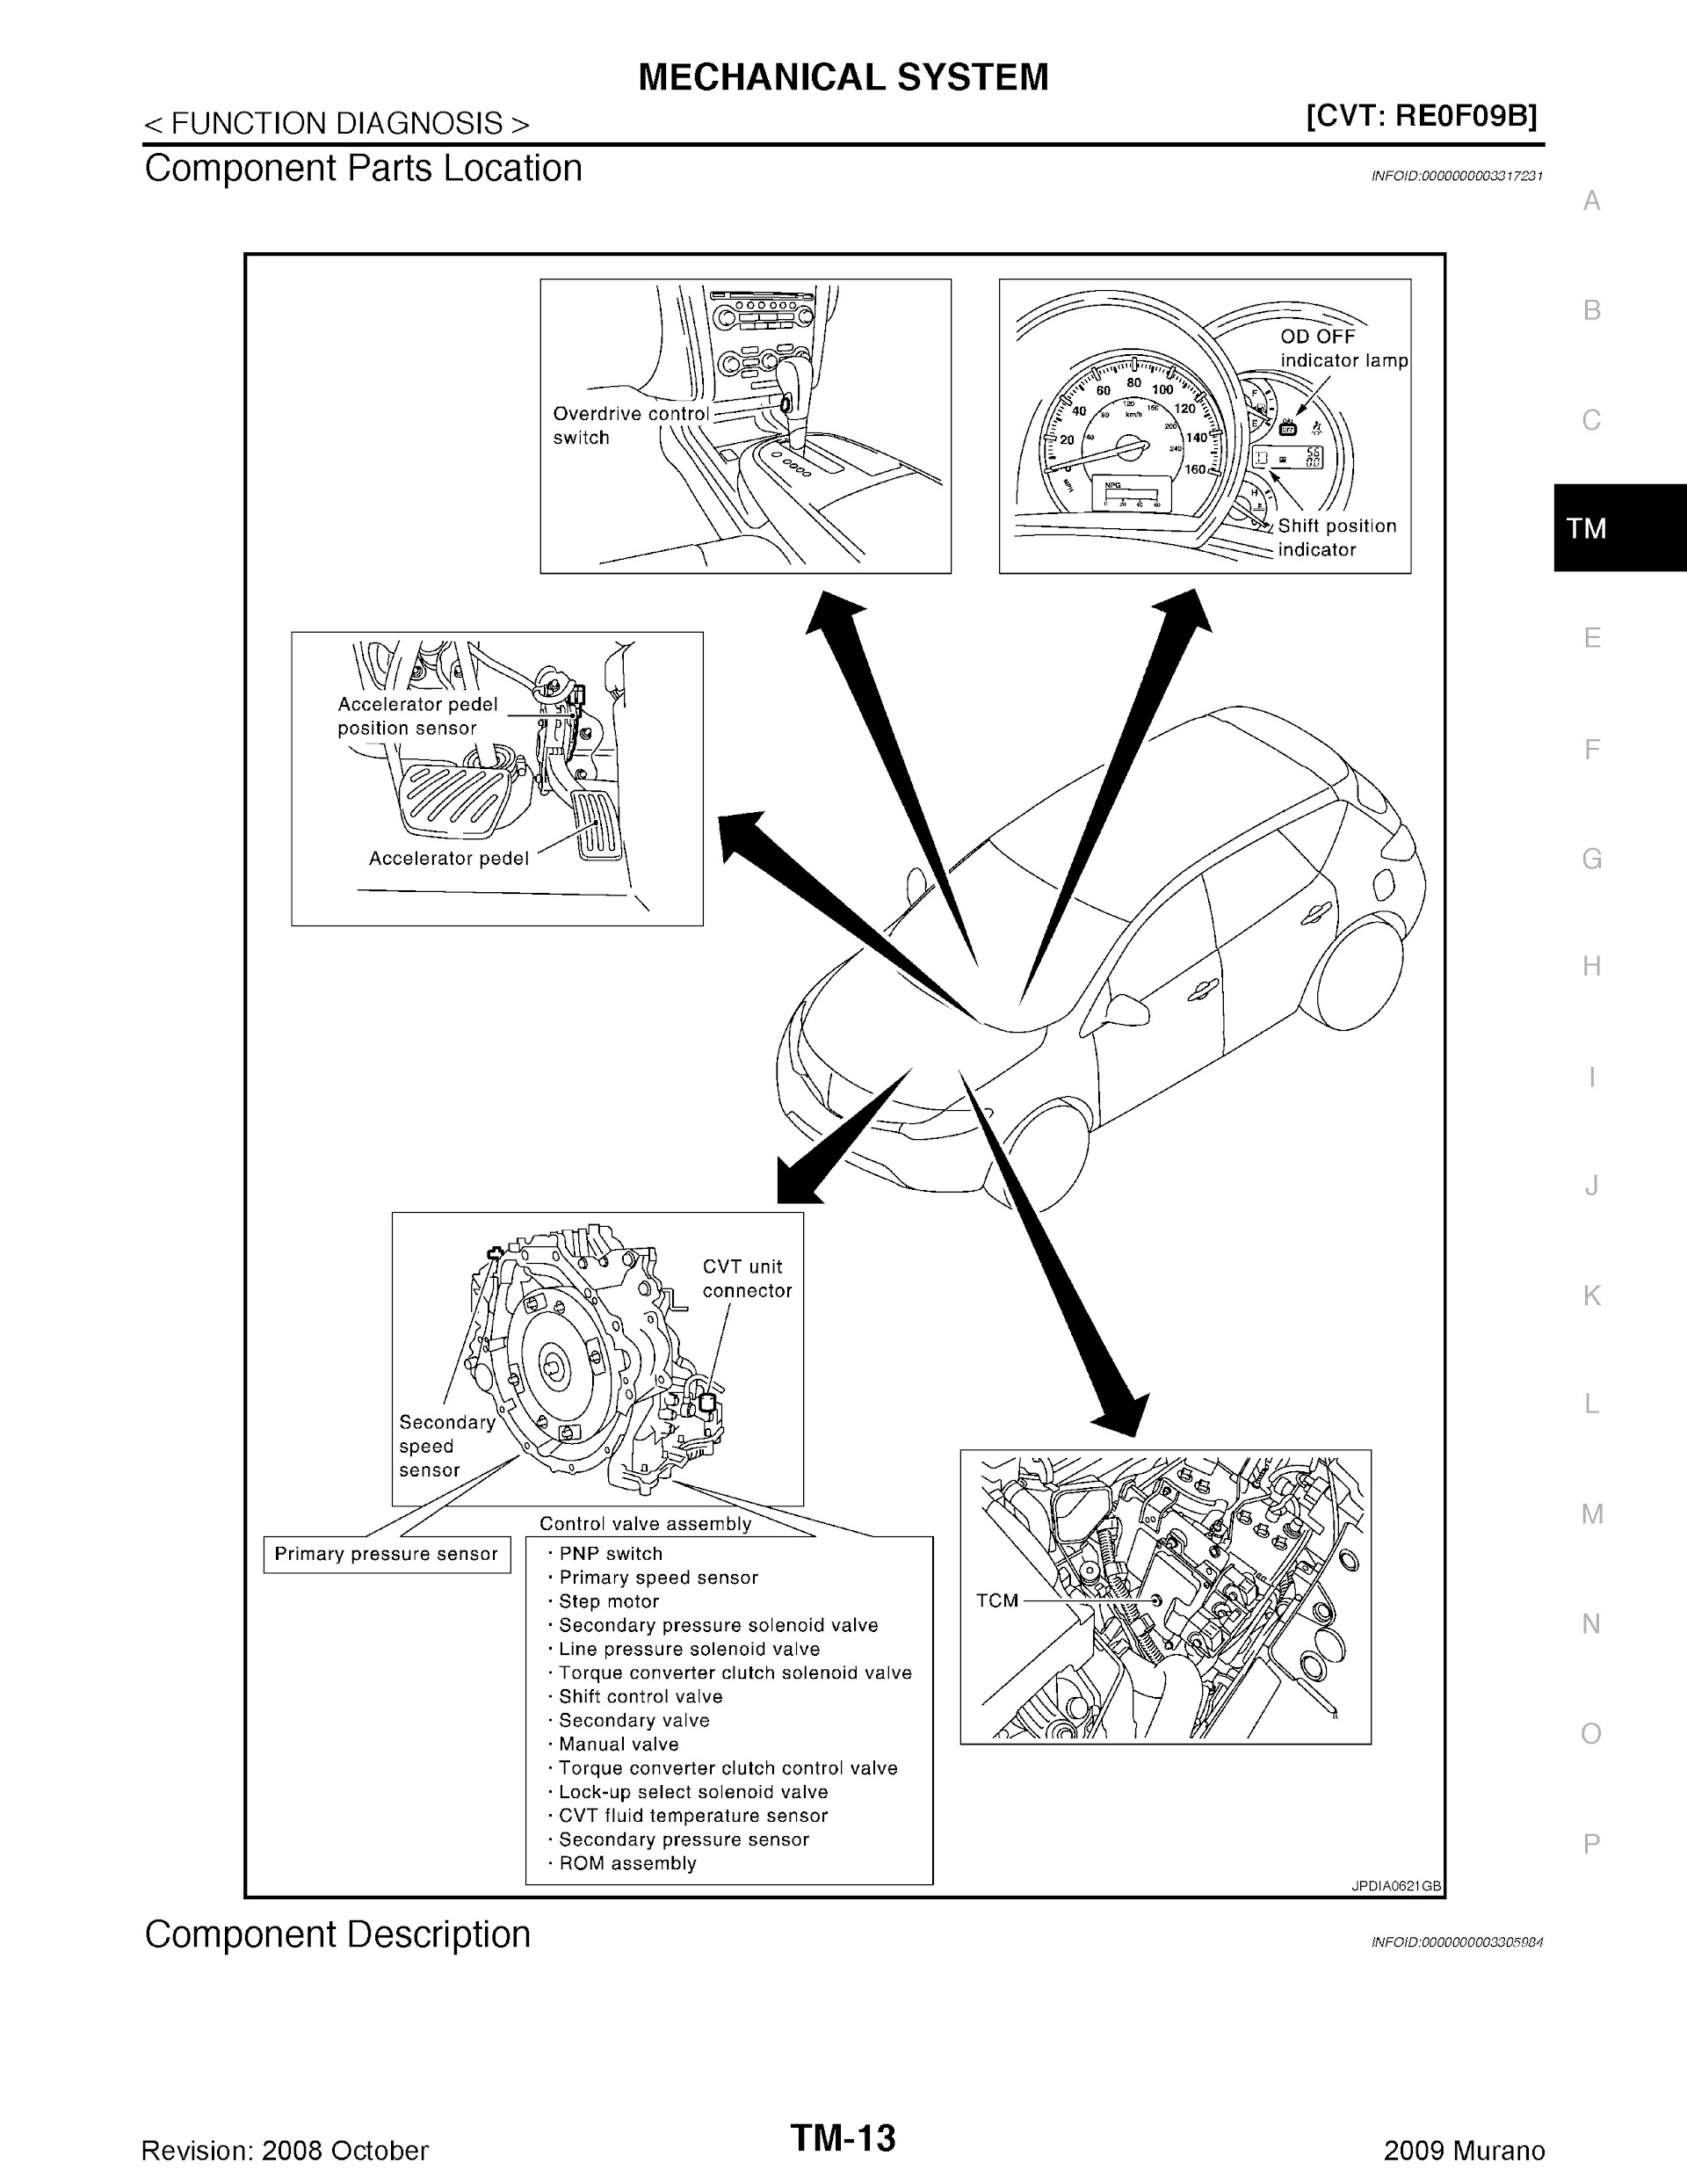 2009 Nissan Murano Repair Manual, Mechanical System Component Parts Location